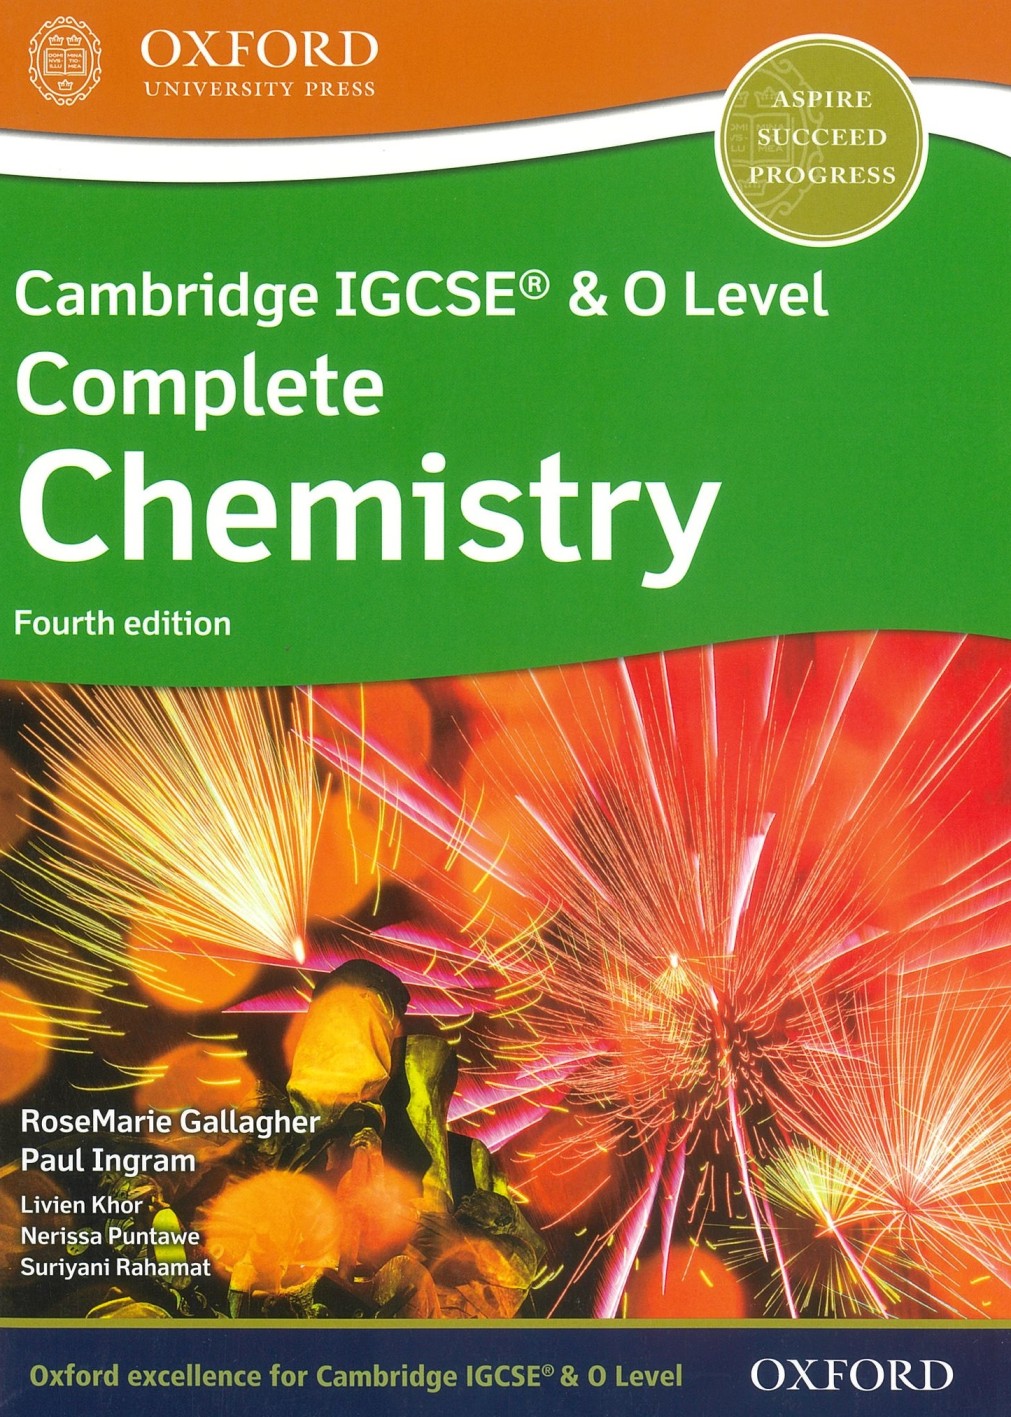 OUP - COMPLETE CHEMISTRY FOR IGCSE - GALLAGHER 4TH ED.